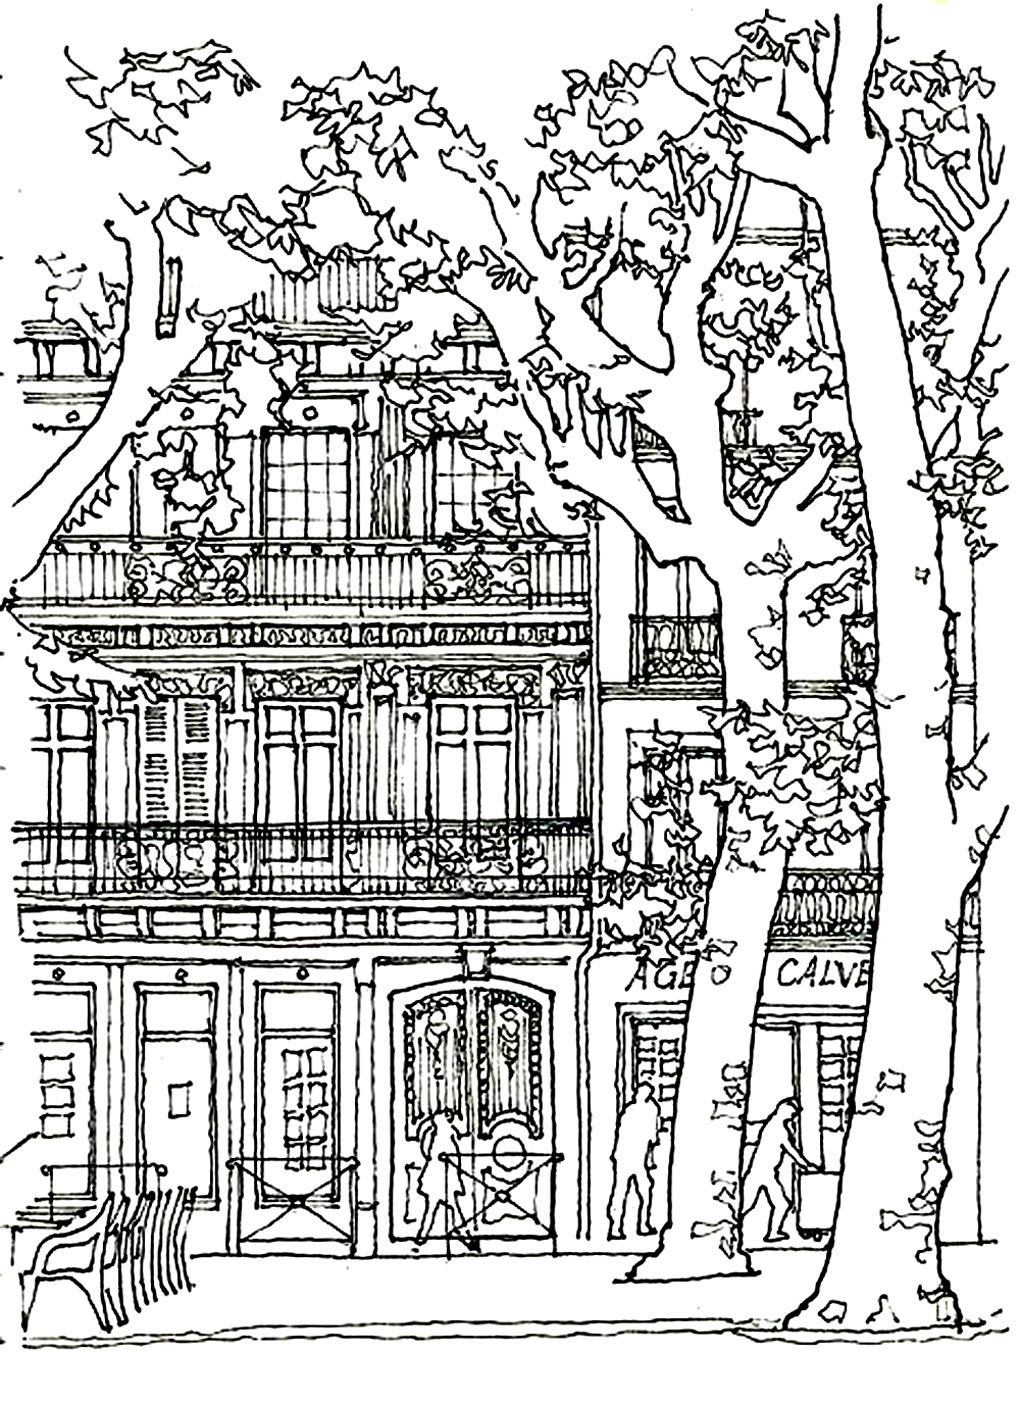 Harmony between habitat and vegetation. A lovely house surrounded by lush trees.A peaceful and serene scene, for a coloring page that can inspire you to find a balance between habitat and vegetation.